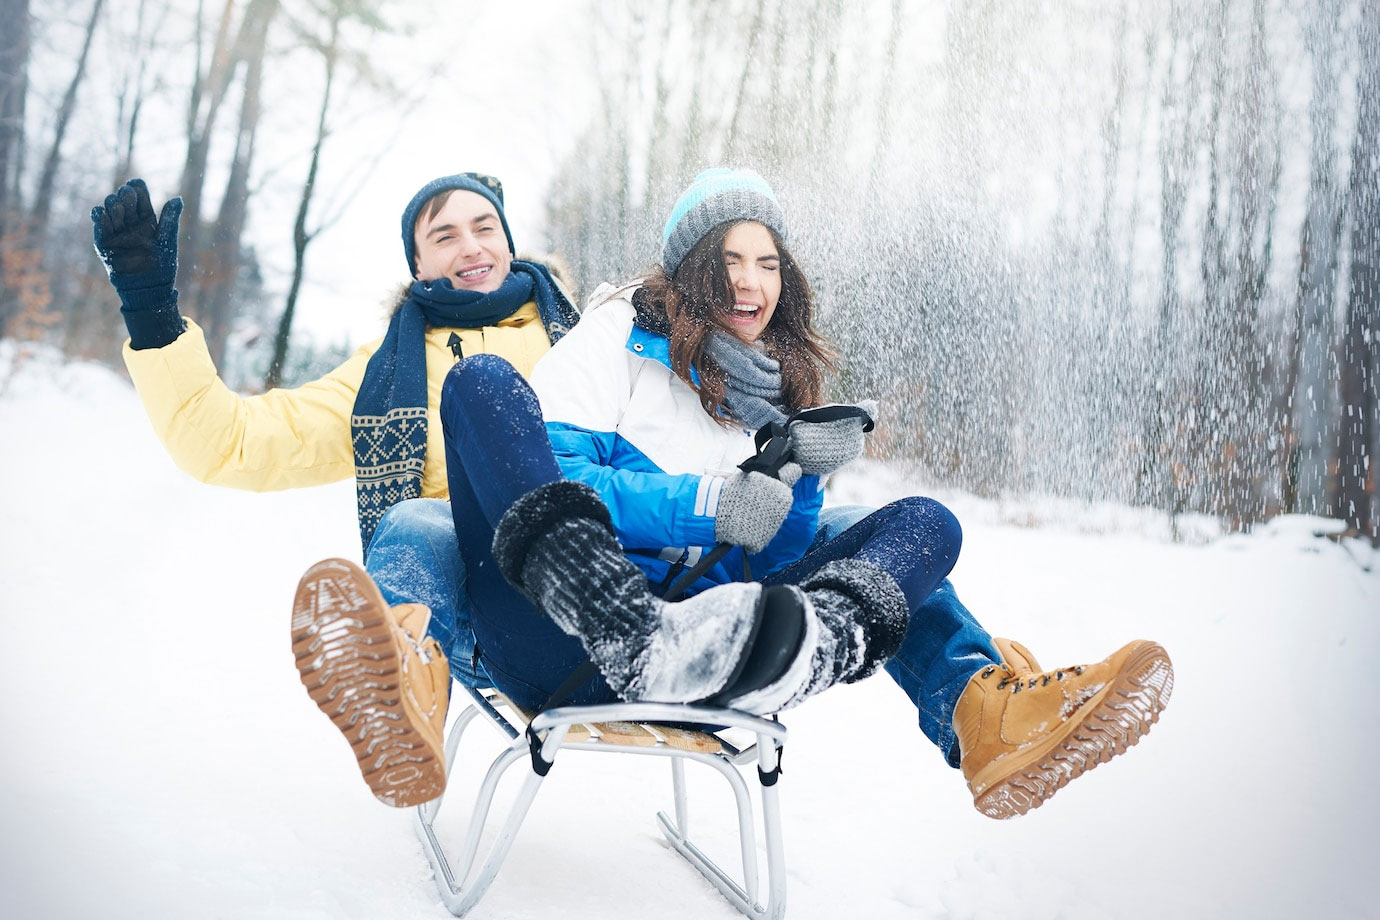 Image shows a young man and woman sledding in the snow. 